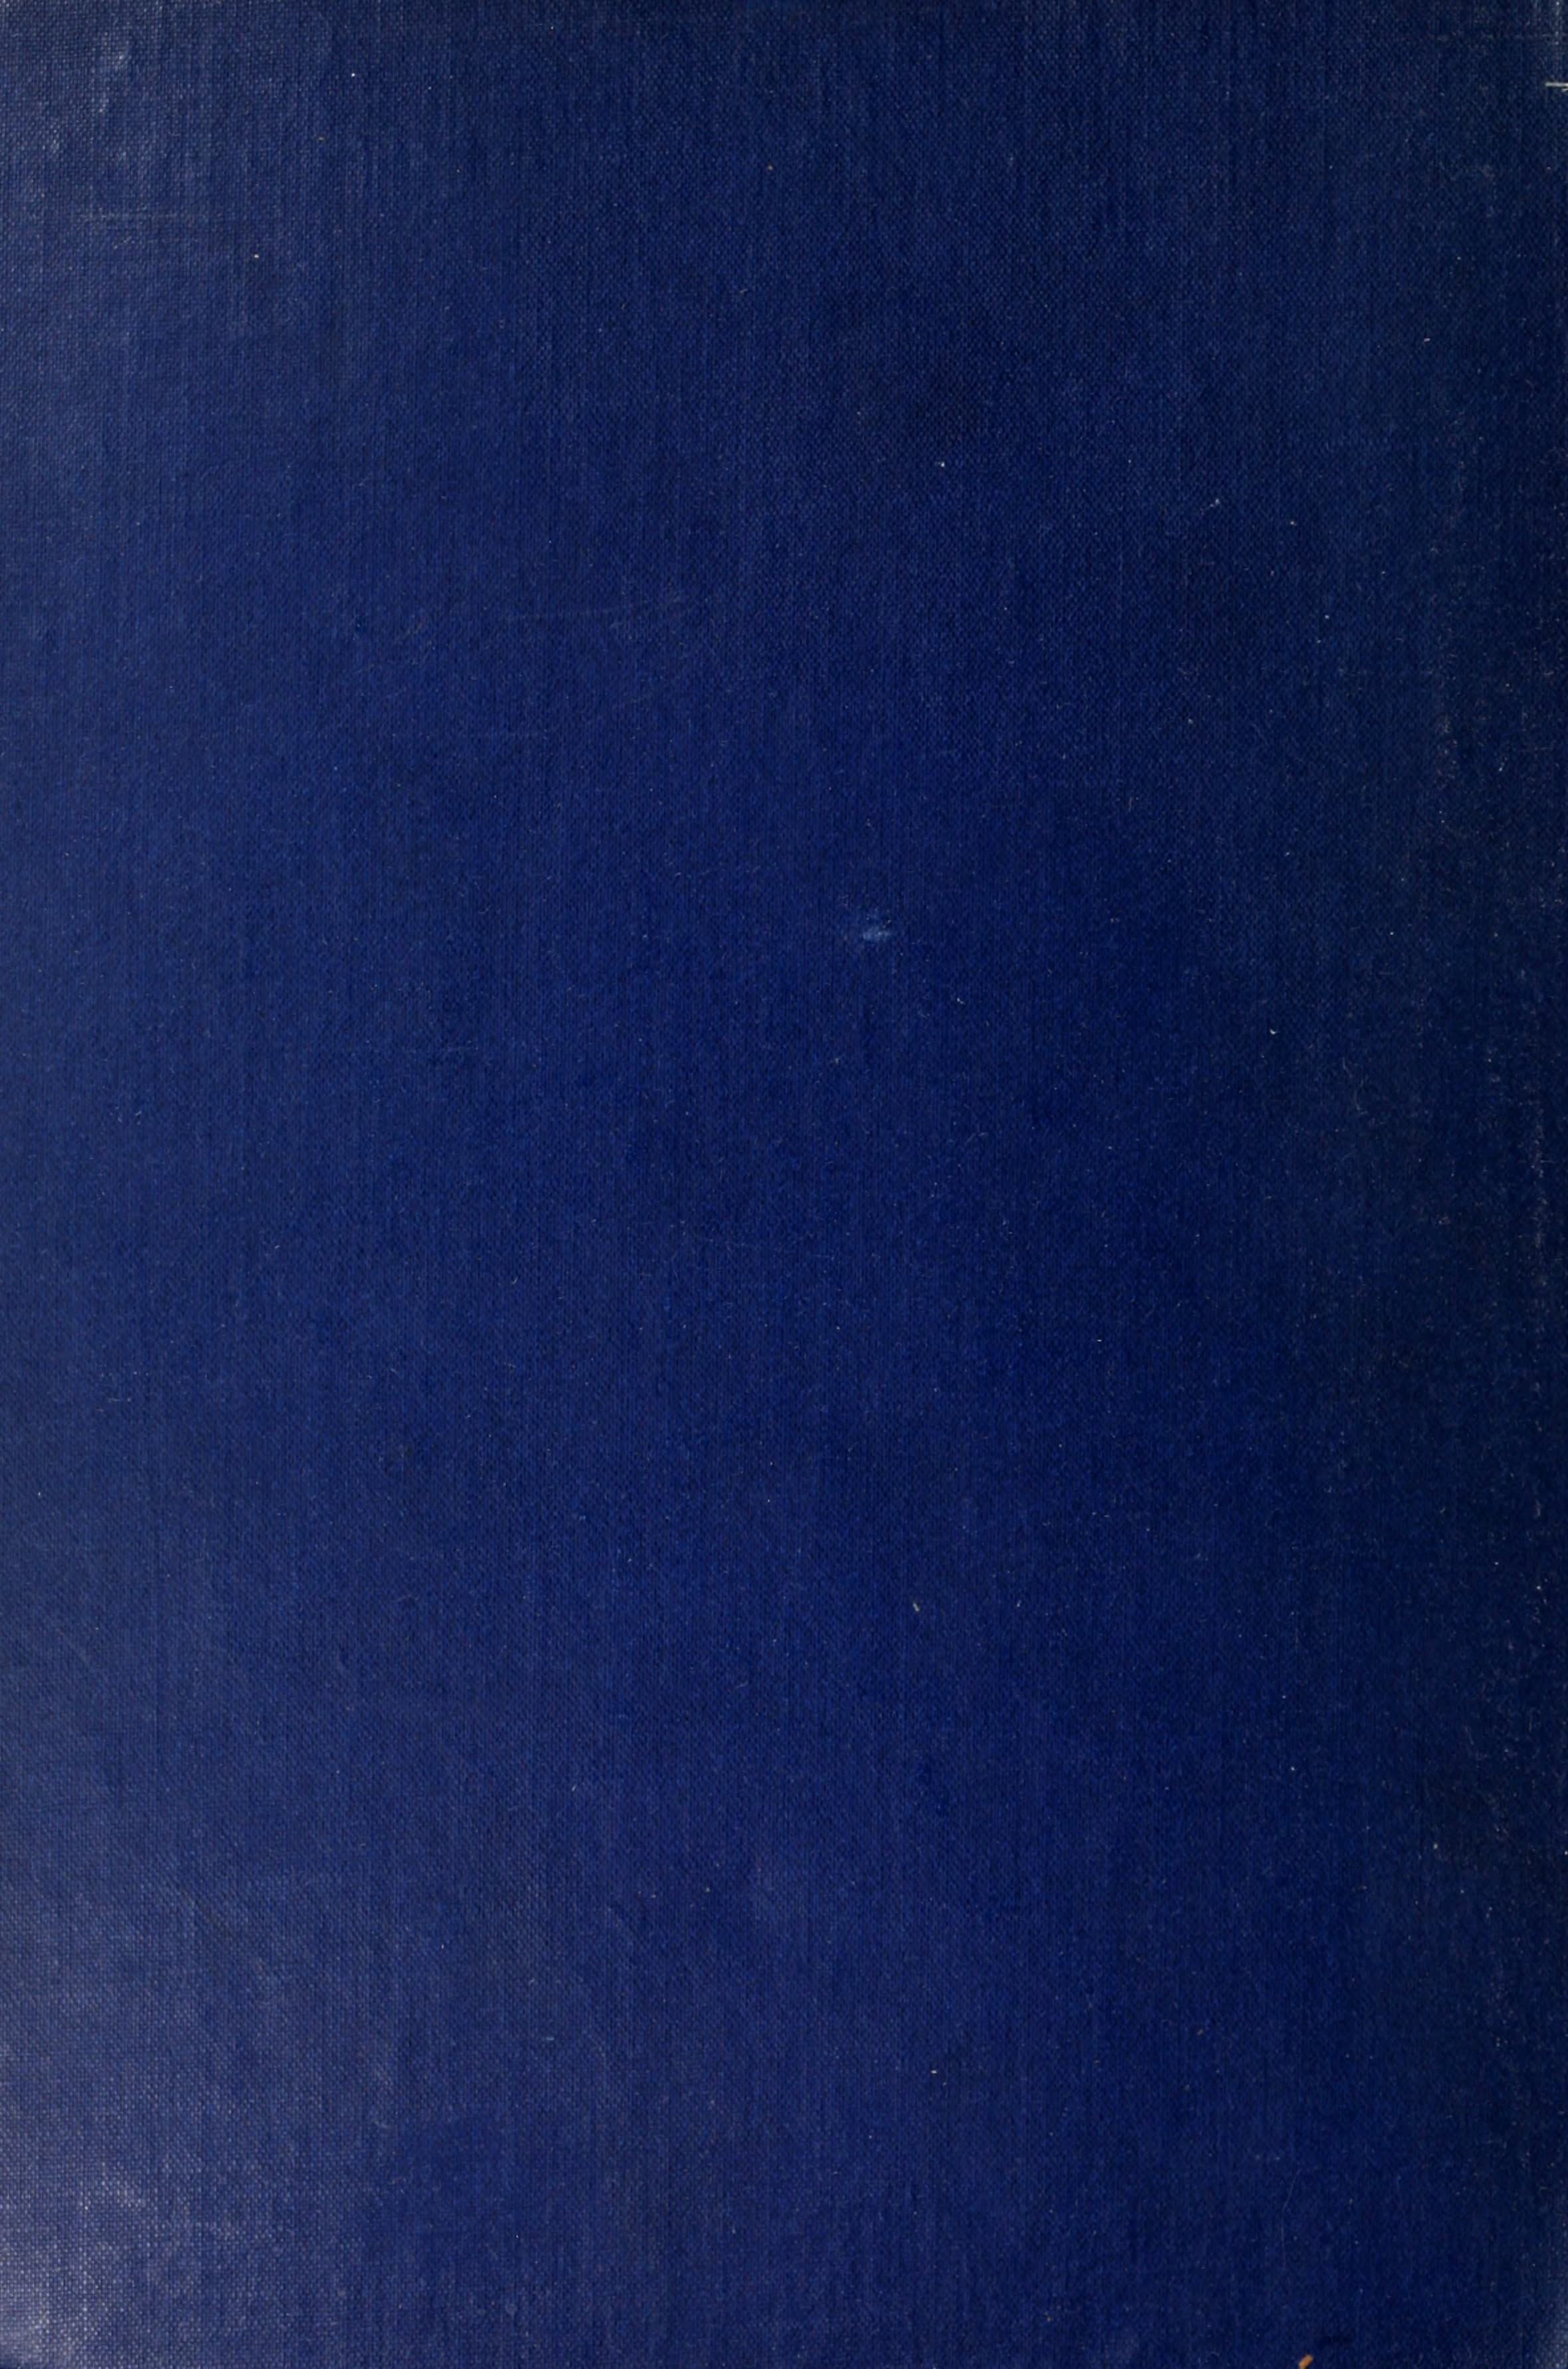 Montreux, Painted and Described - Back Cover (1908)